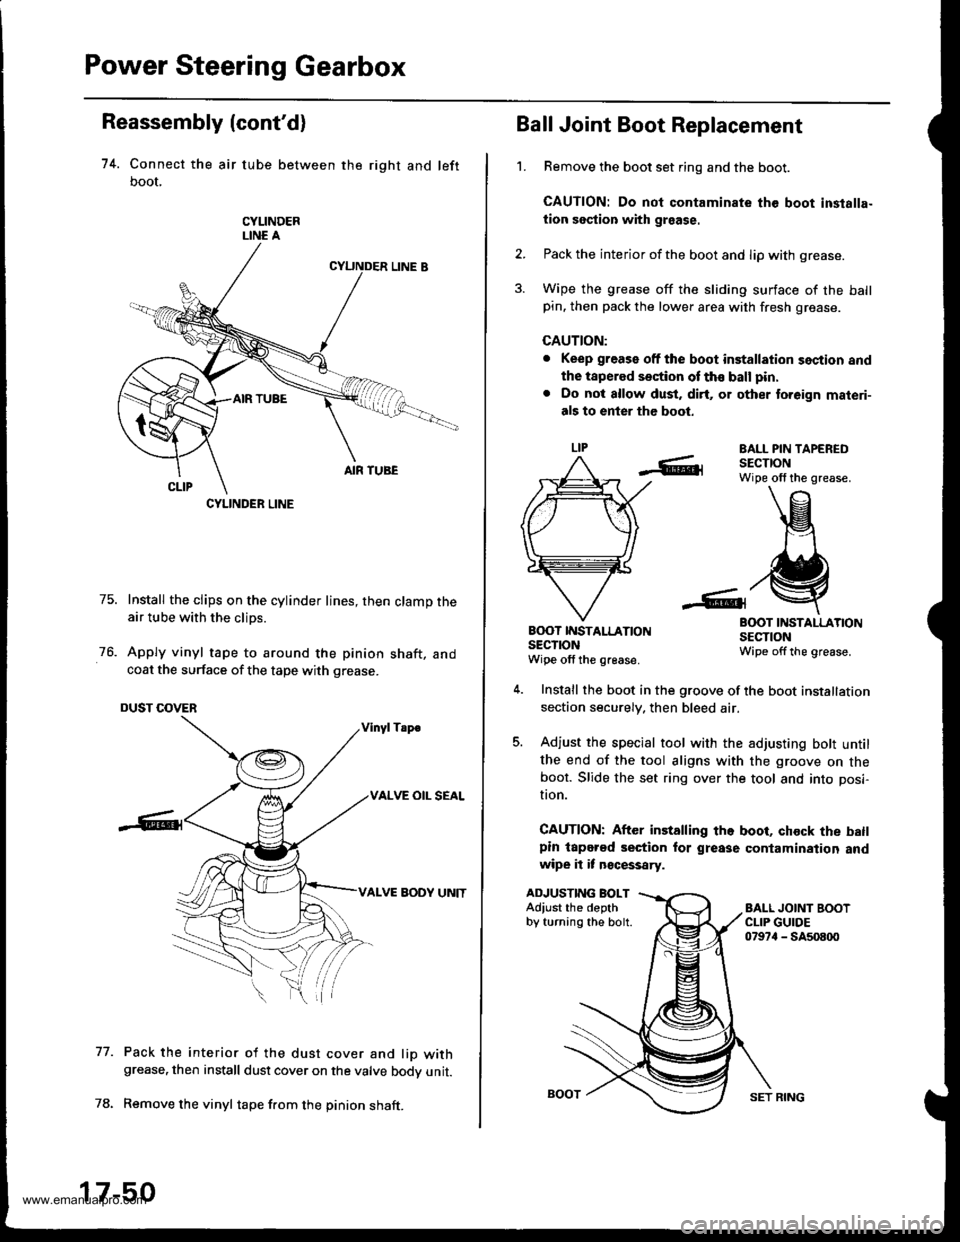 HONDA CR-V 1999 RD1-RD3 / 1.G User Guide 
Power Steering Gearbox
Reassembly (contd)
74. Connect the air tube between the right and left
boot,
CYLINDERLINE A
75. Install the clips on the cylinder lines, then clamp theair tube with the clips.